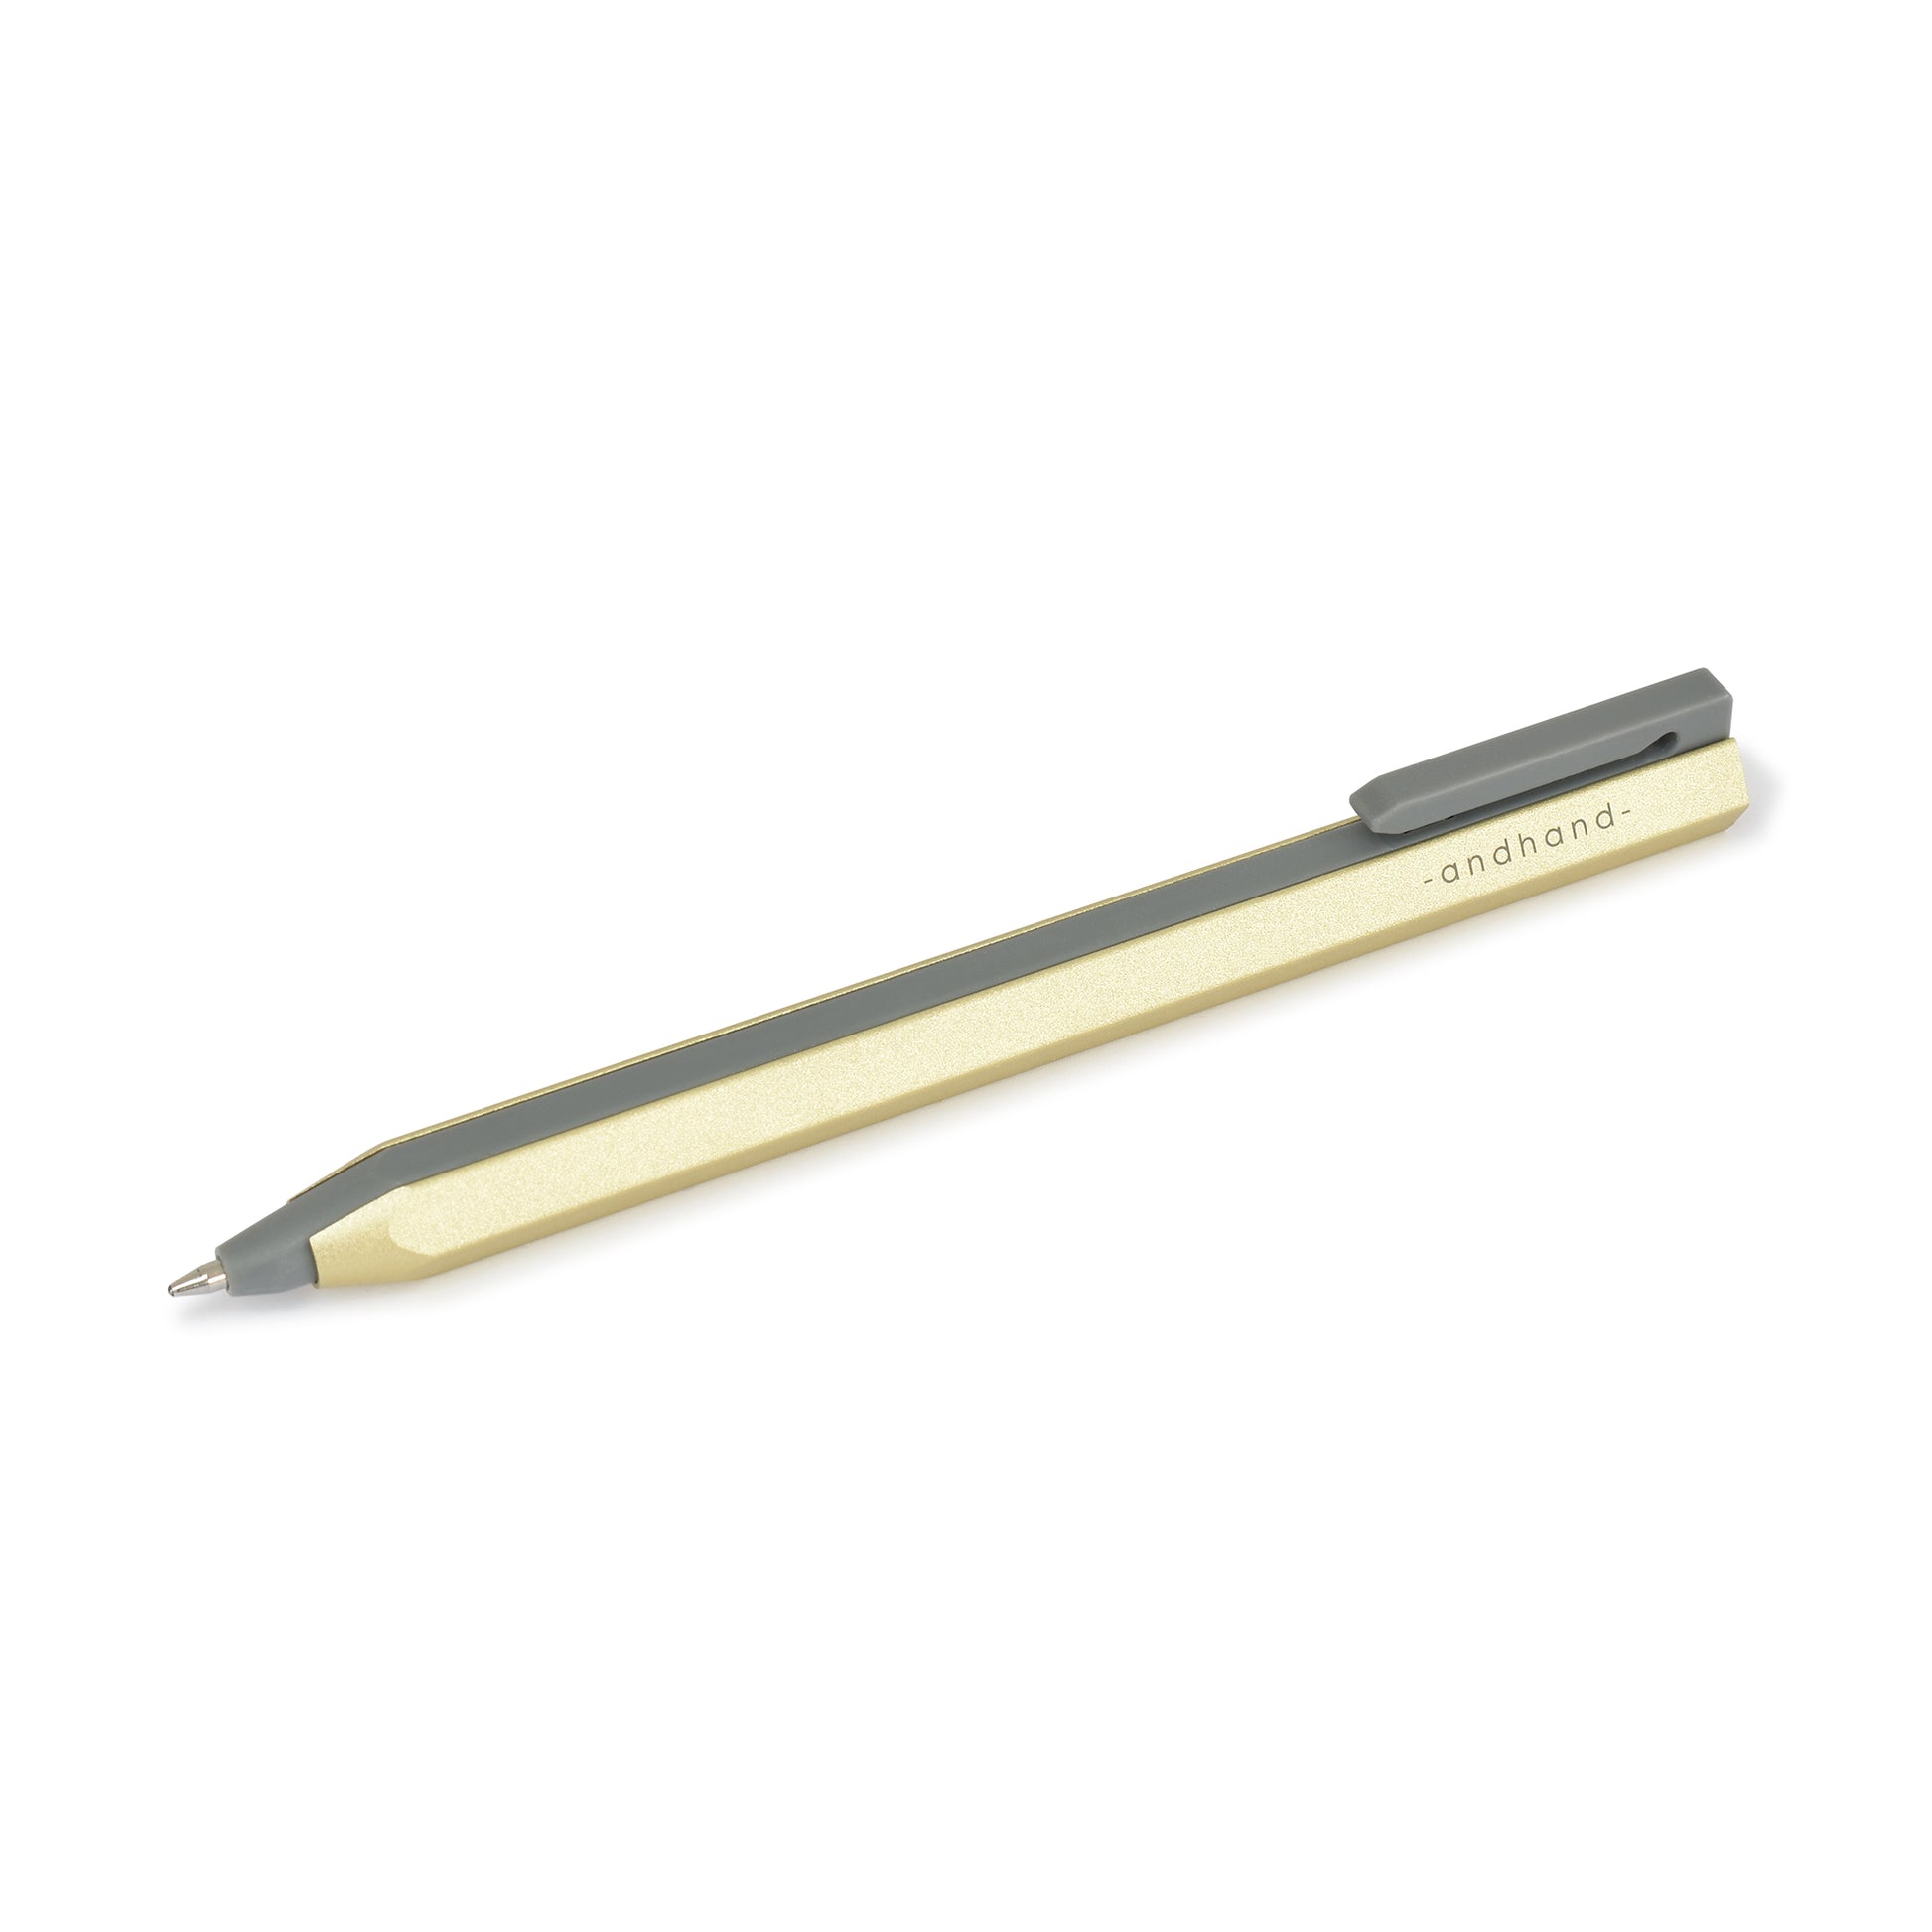 Core retractable pen is elegantly minimal in design and has been crafted from a durable palette of materials. Unique retracting mechanism and stylish gold finish.